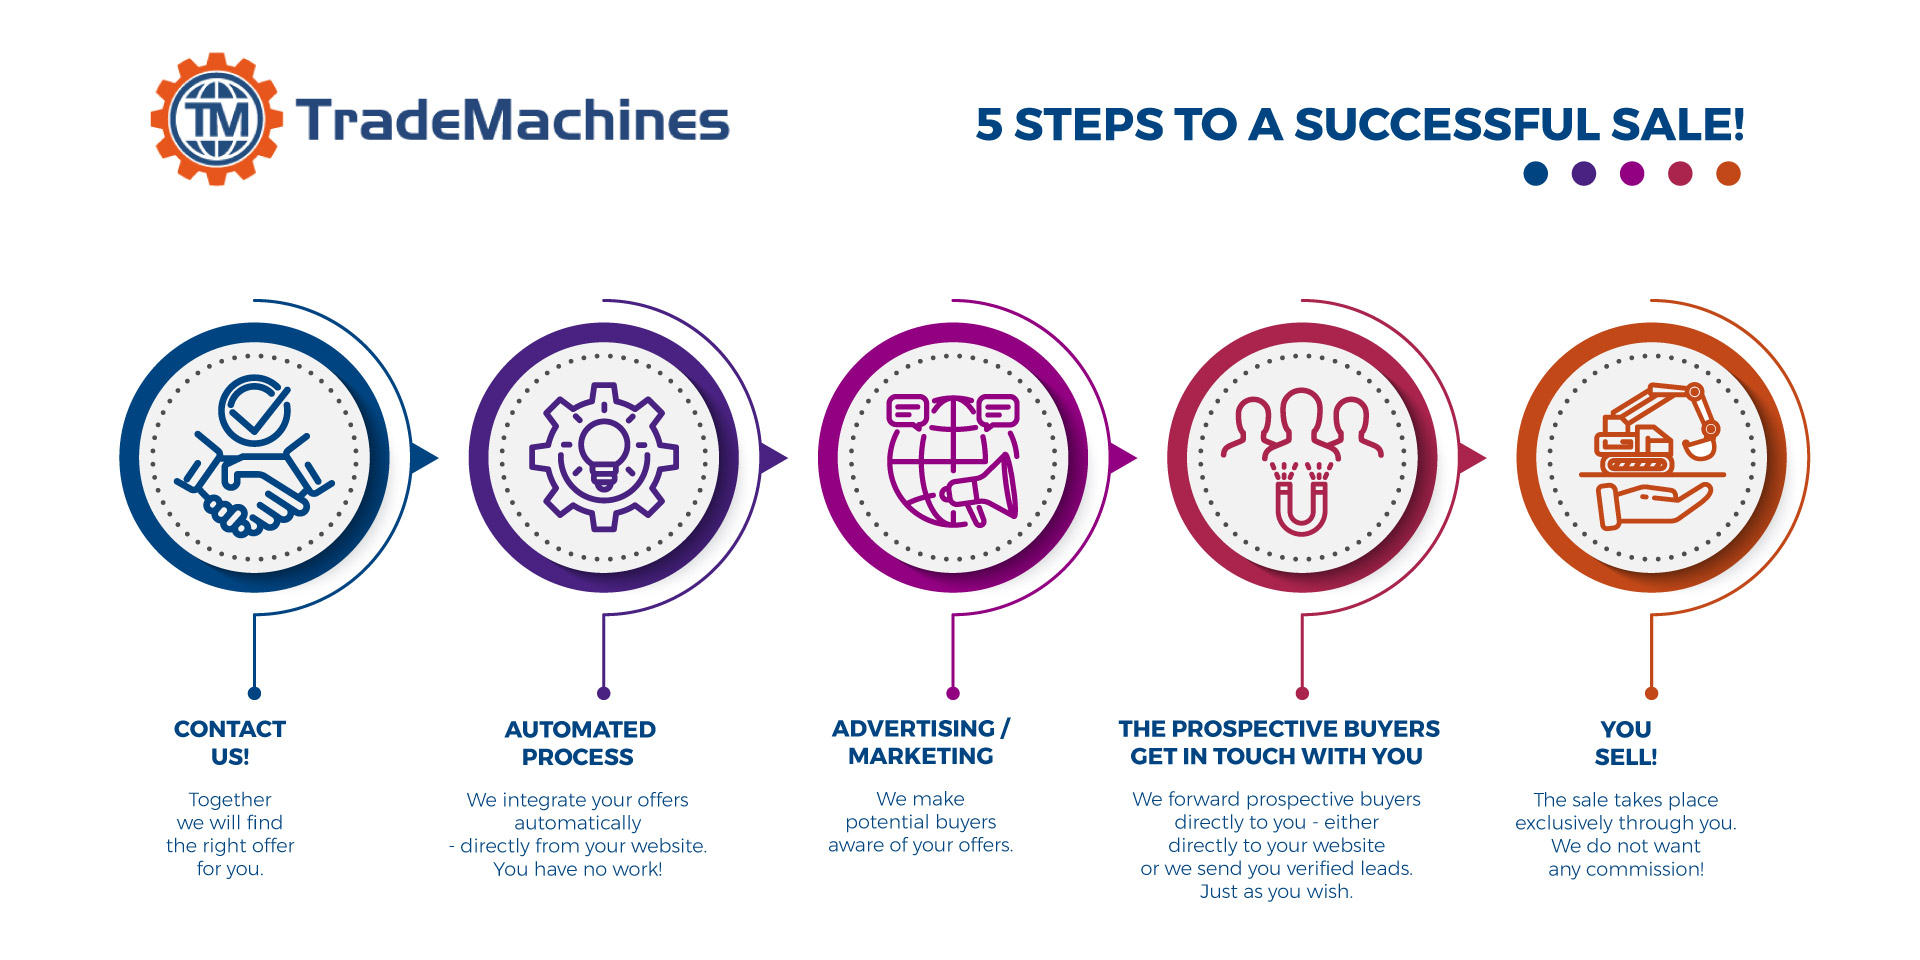 TradeMachines | 5 steps to a successful sale